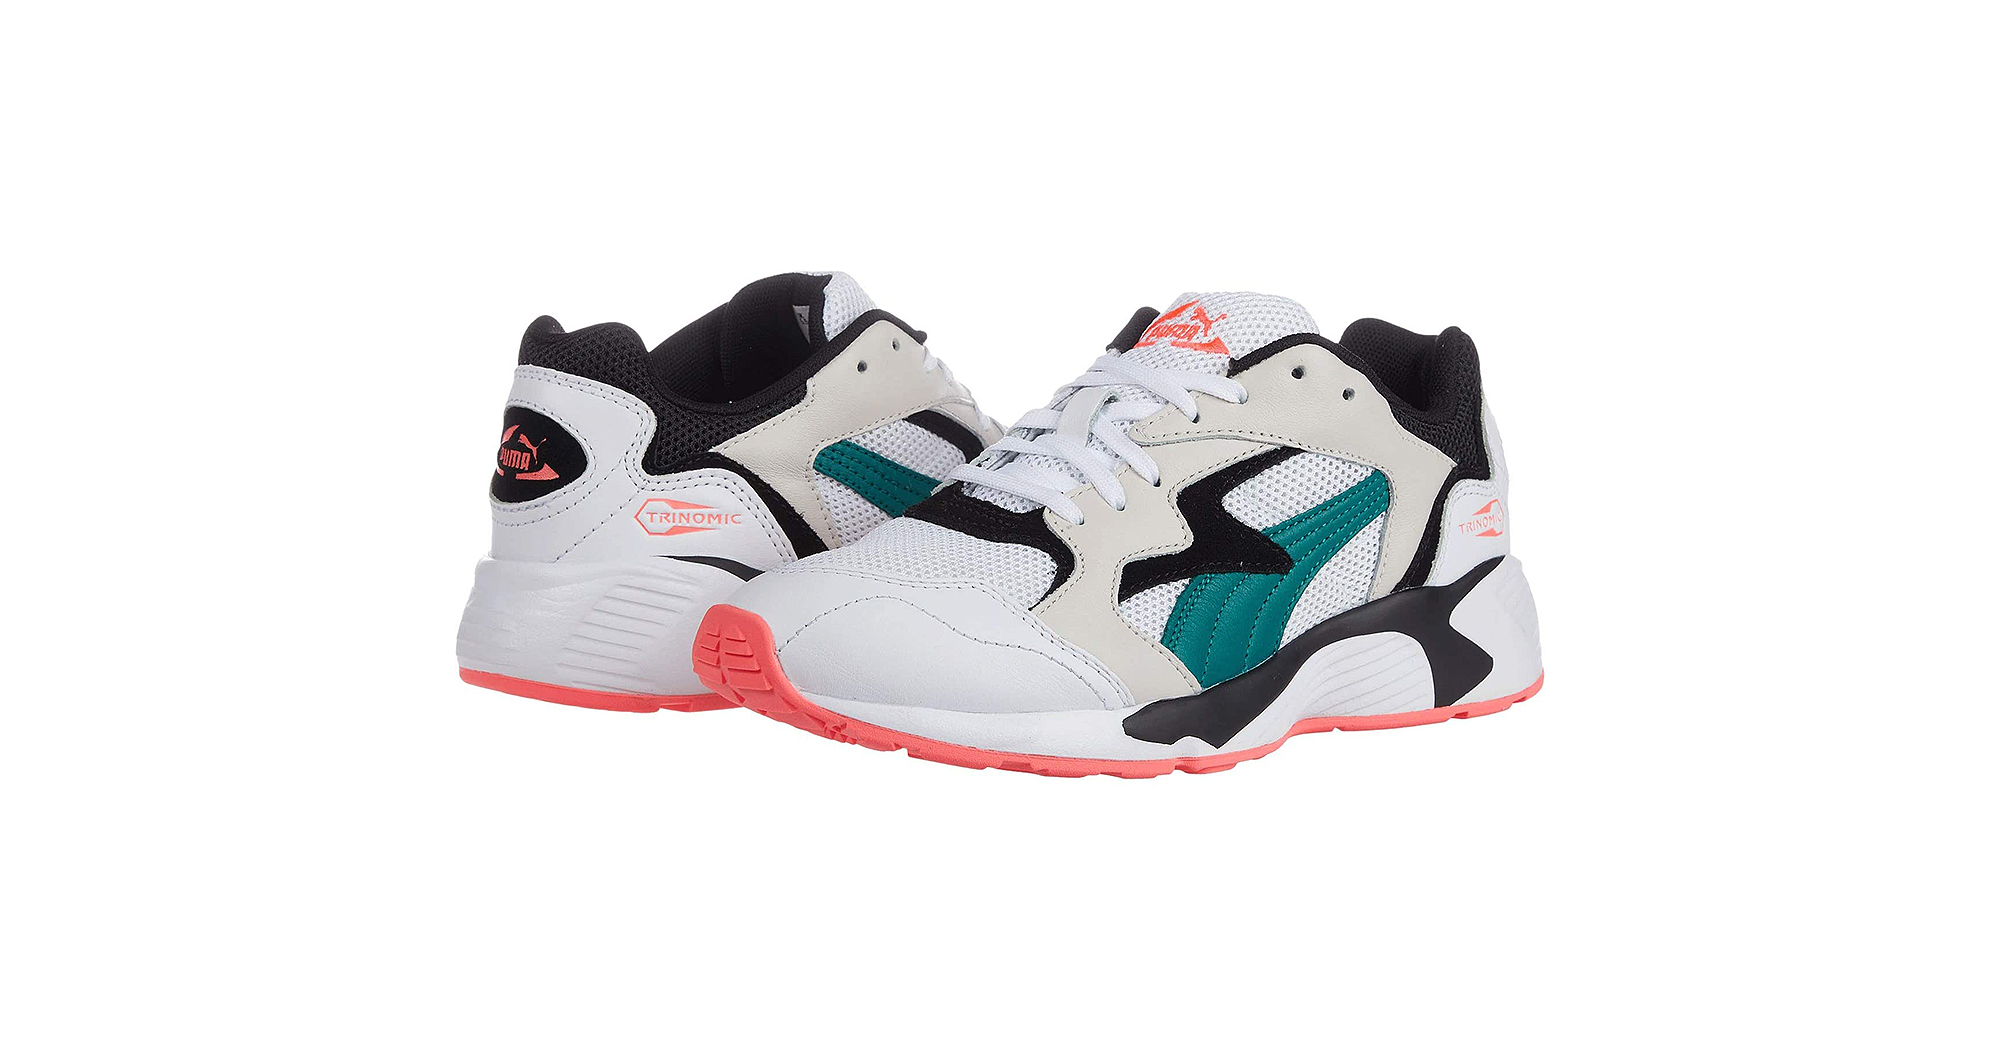 PUMA Prevail Classic Sneakers Are 